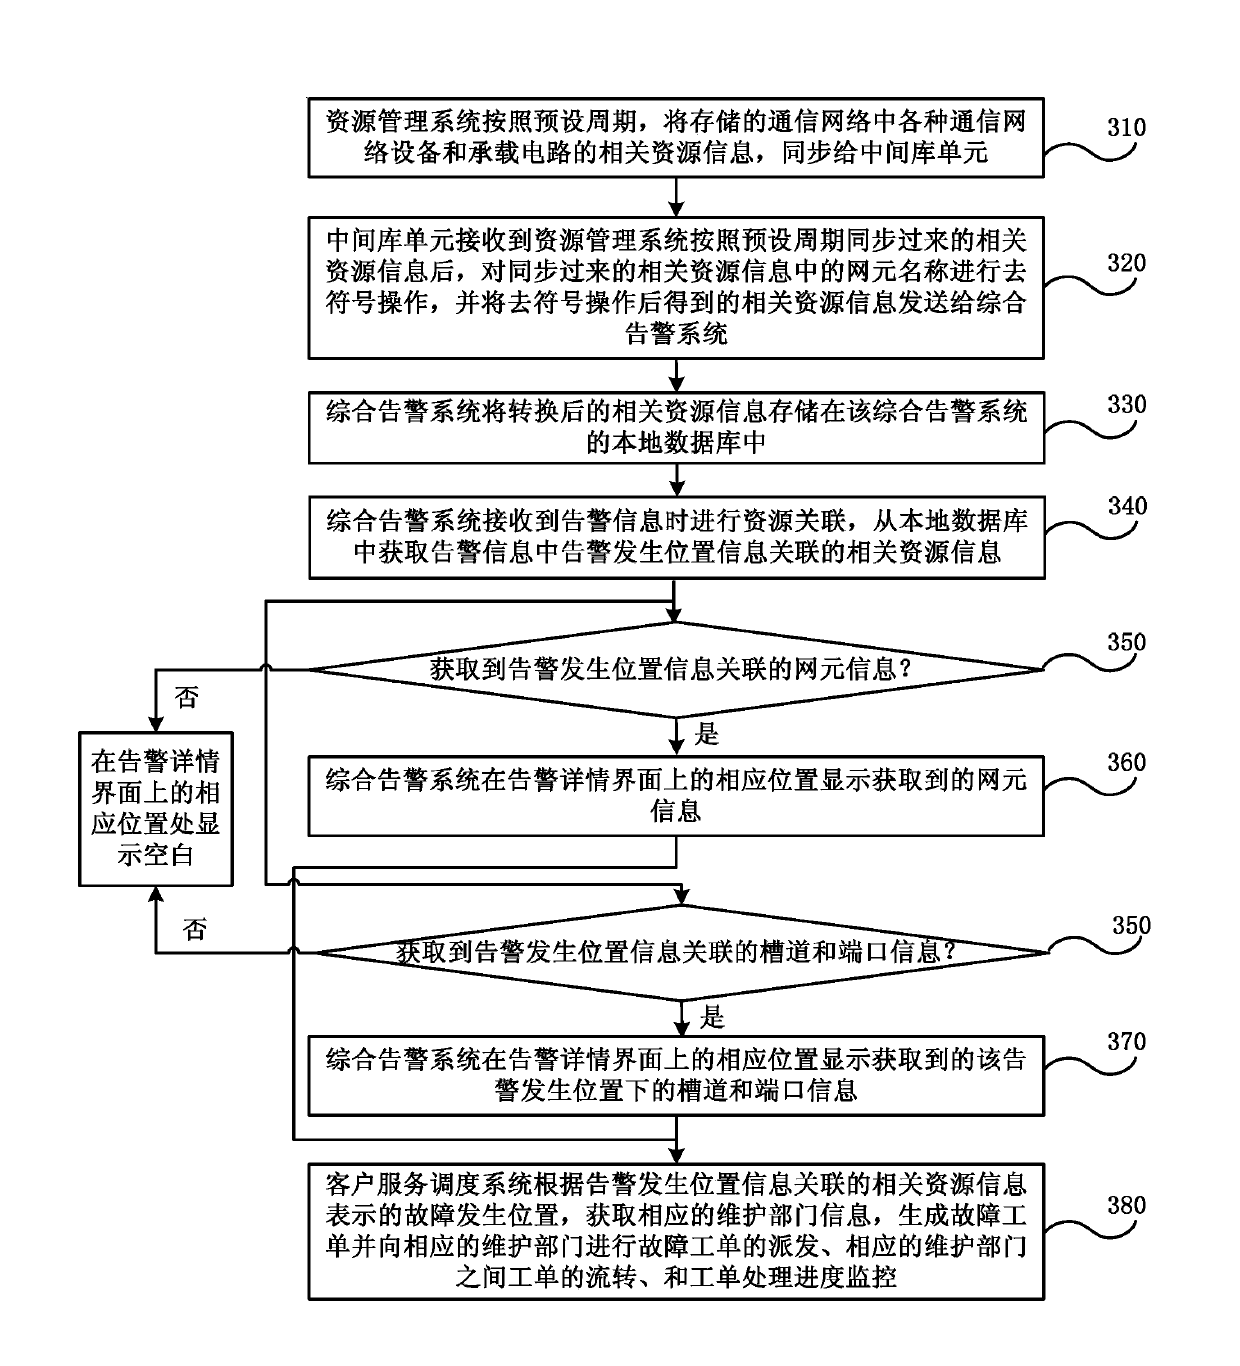 System and method for positioning failures of communication network equipment based on alarm information